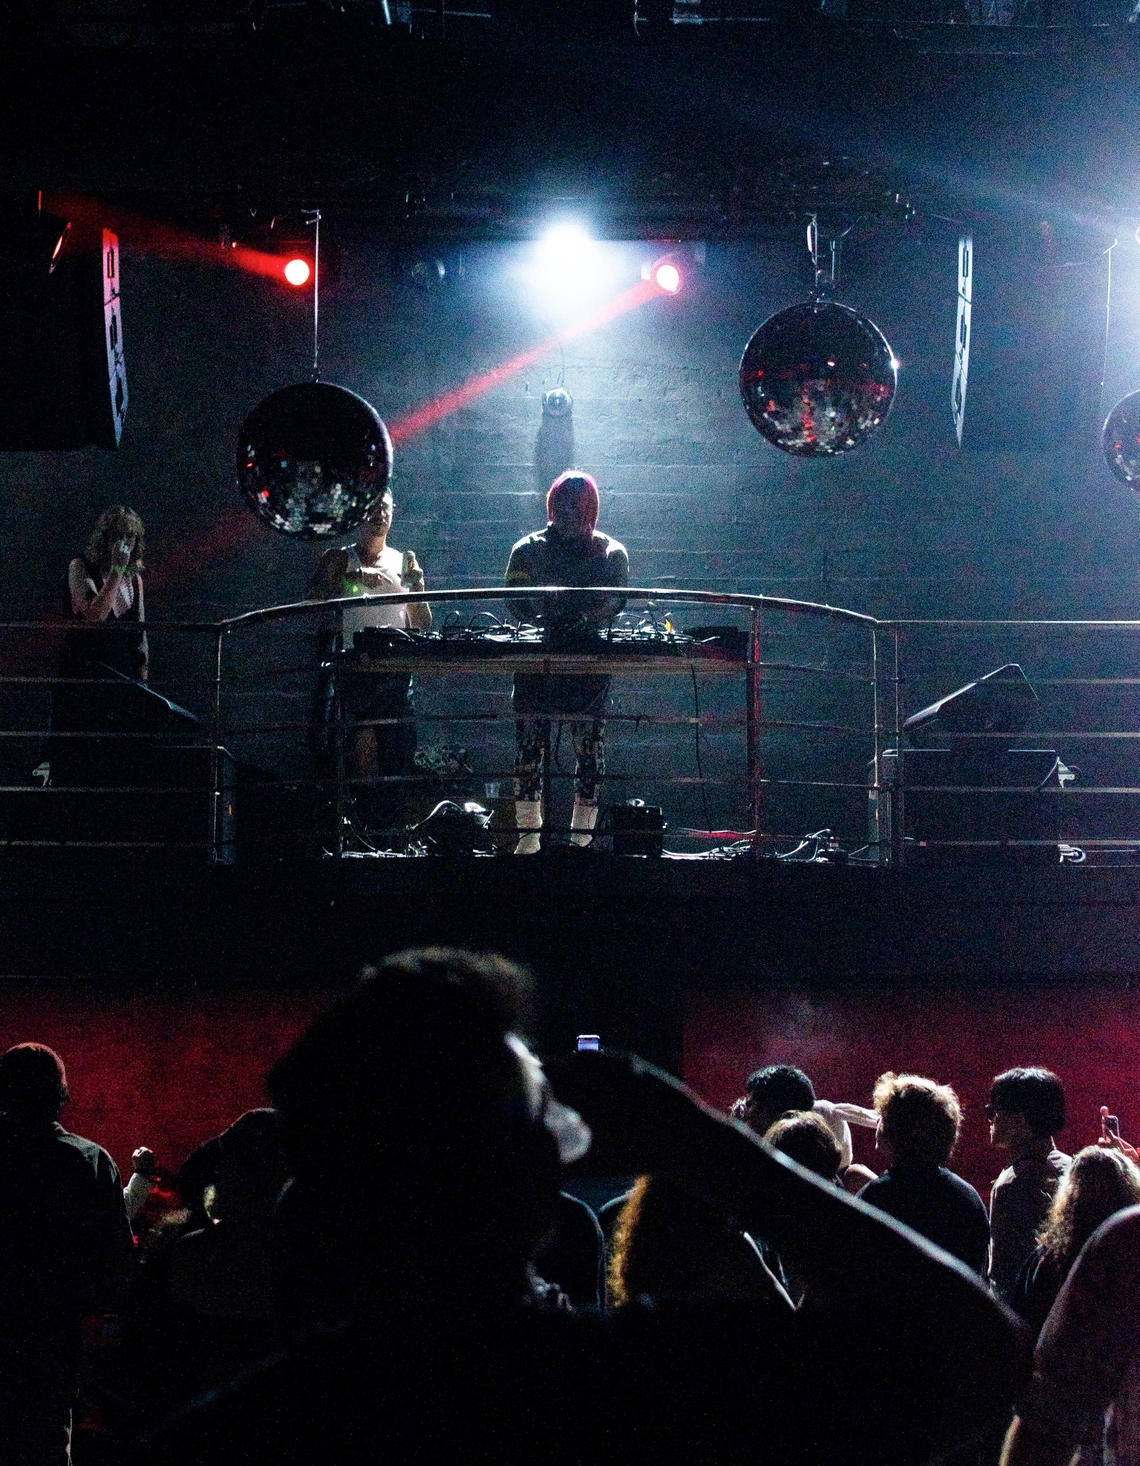 Wide shot of DJ Miss Parker on the decks in dramatic club lighting surrounded by discoballs and a dancing crowd.